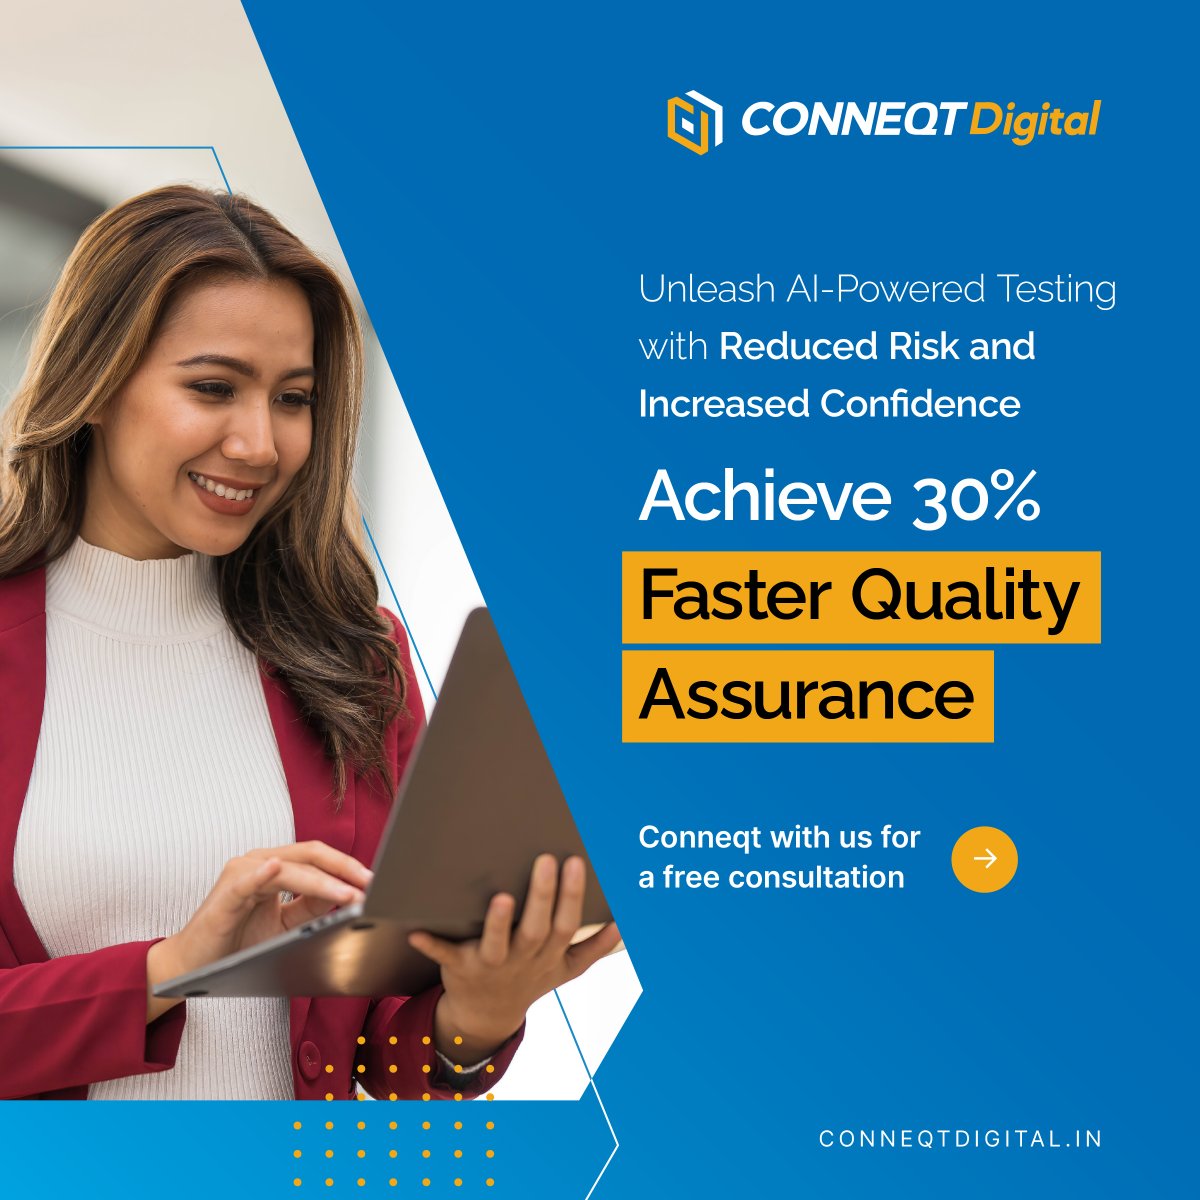 Accelerate your digital journey with confidence. #ConneqtDigital & #Tricentis deliver a powerful combination: 30% faster quality assurance with AI-powered testing, guaranteed quality for exceptional customer experiences, and reduced risk to fuel innovation.
#digitalassurance